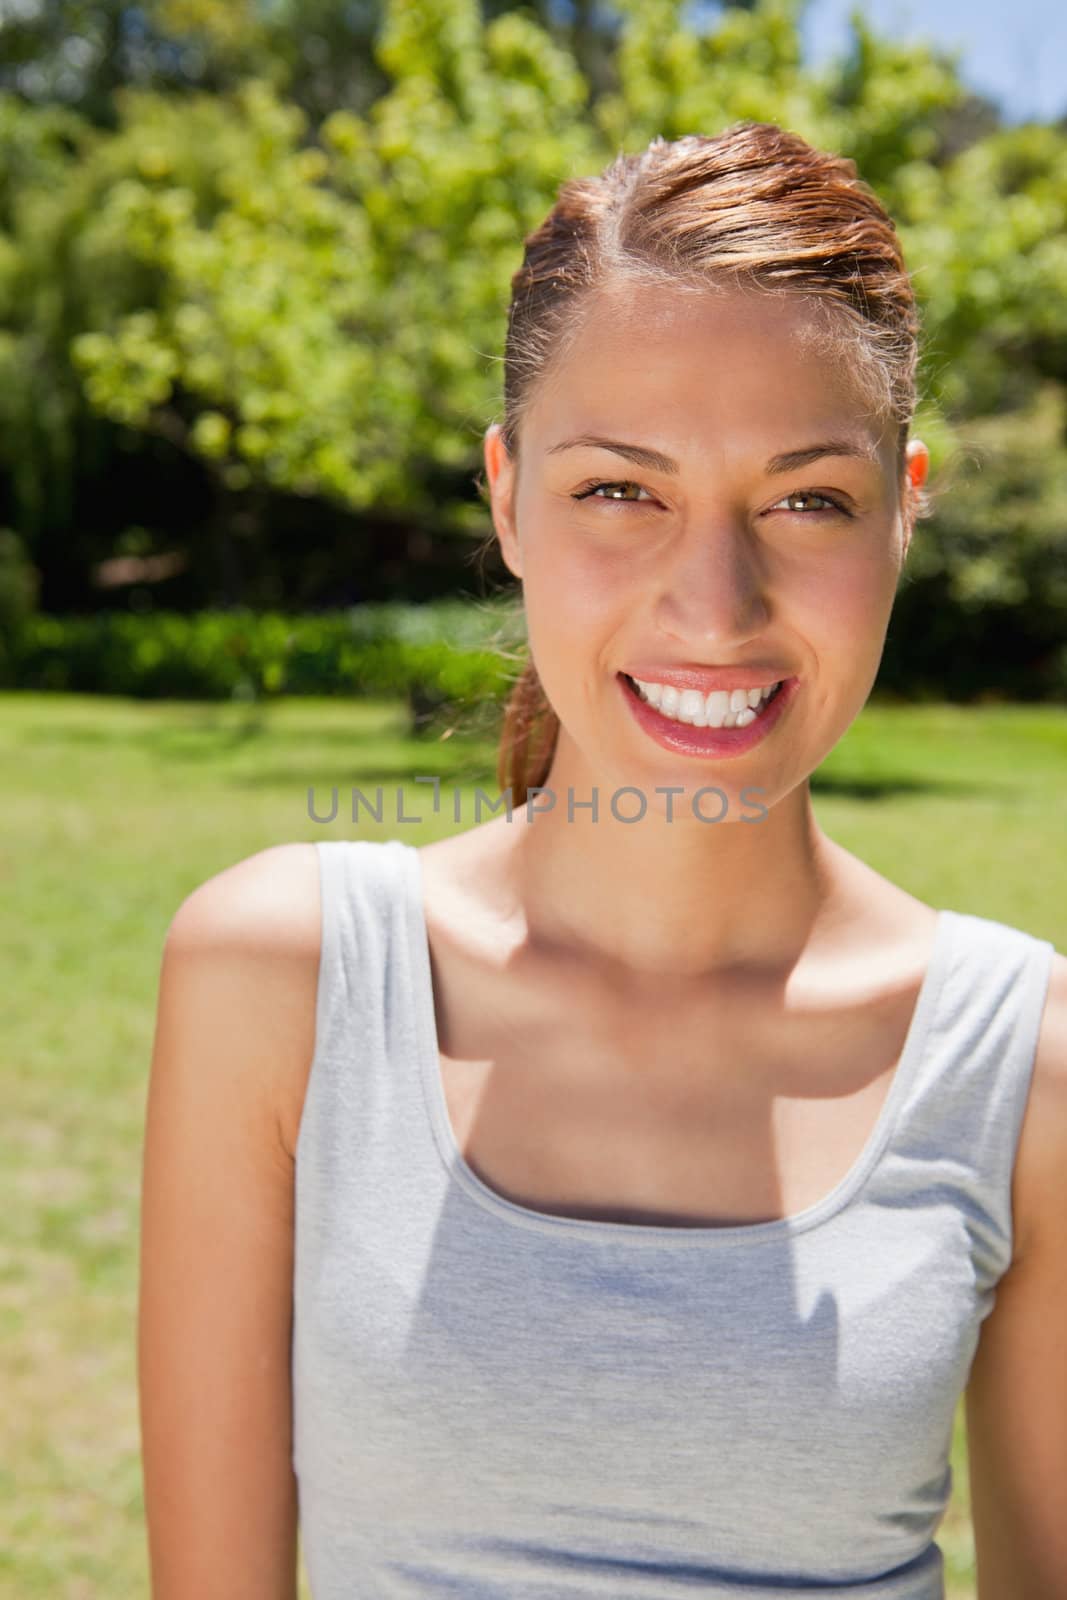 Woman dressed in workout gear smiling while looking straight ahead with trees and grass in the background